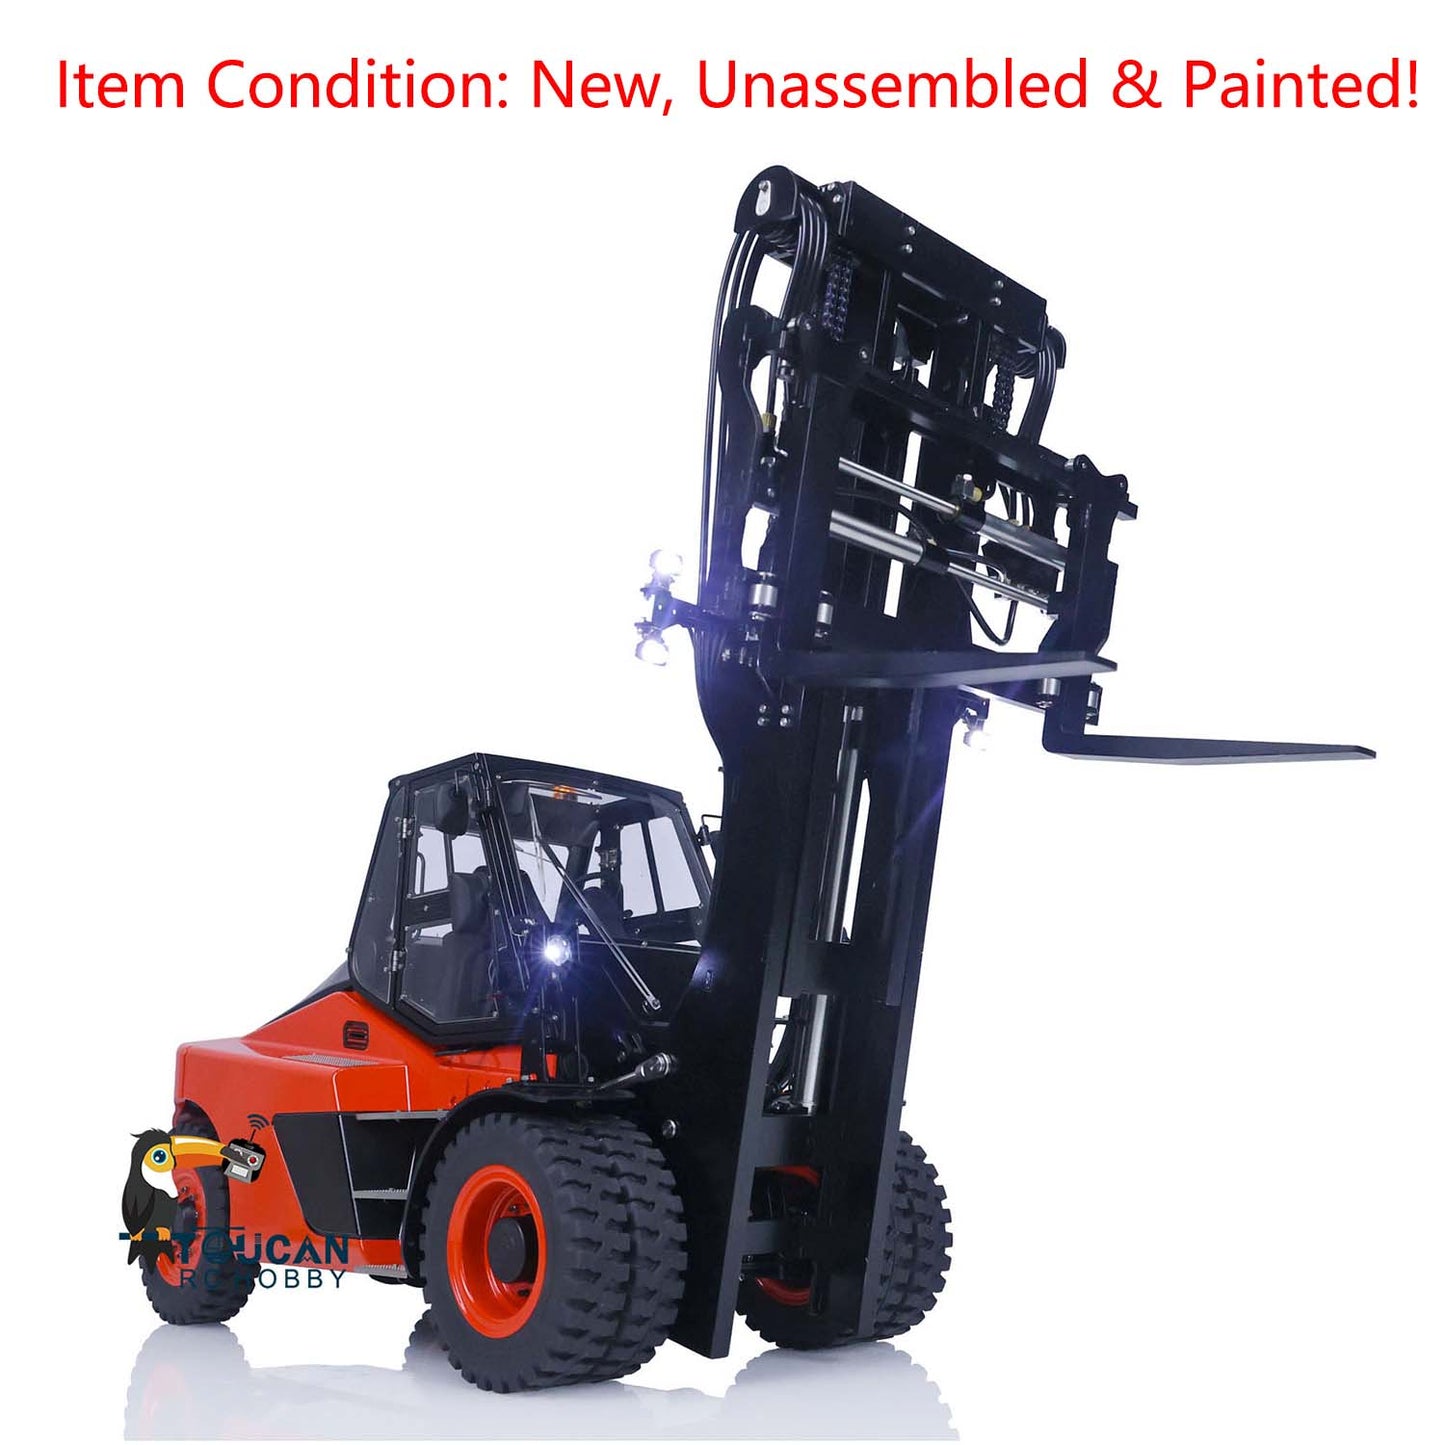 LESU 1/14 RC Front-Wheel Ddrive Hydraulic Painted forklift Model Aoue-LD160S Remote Control Model Light Sound System ESC Servo